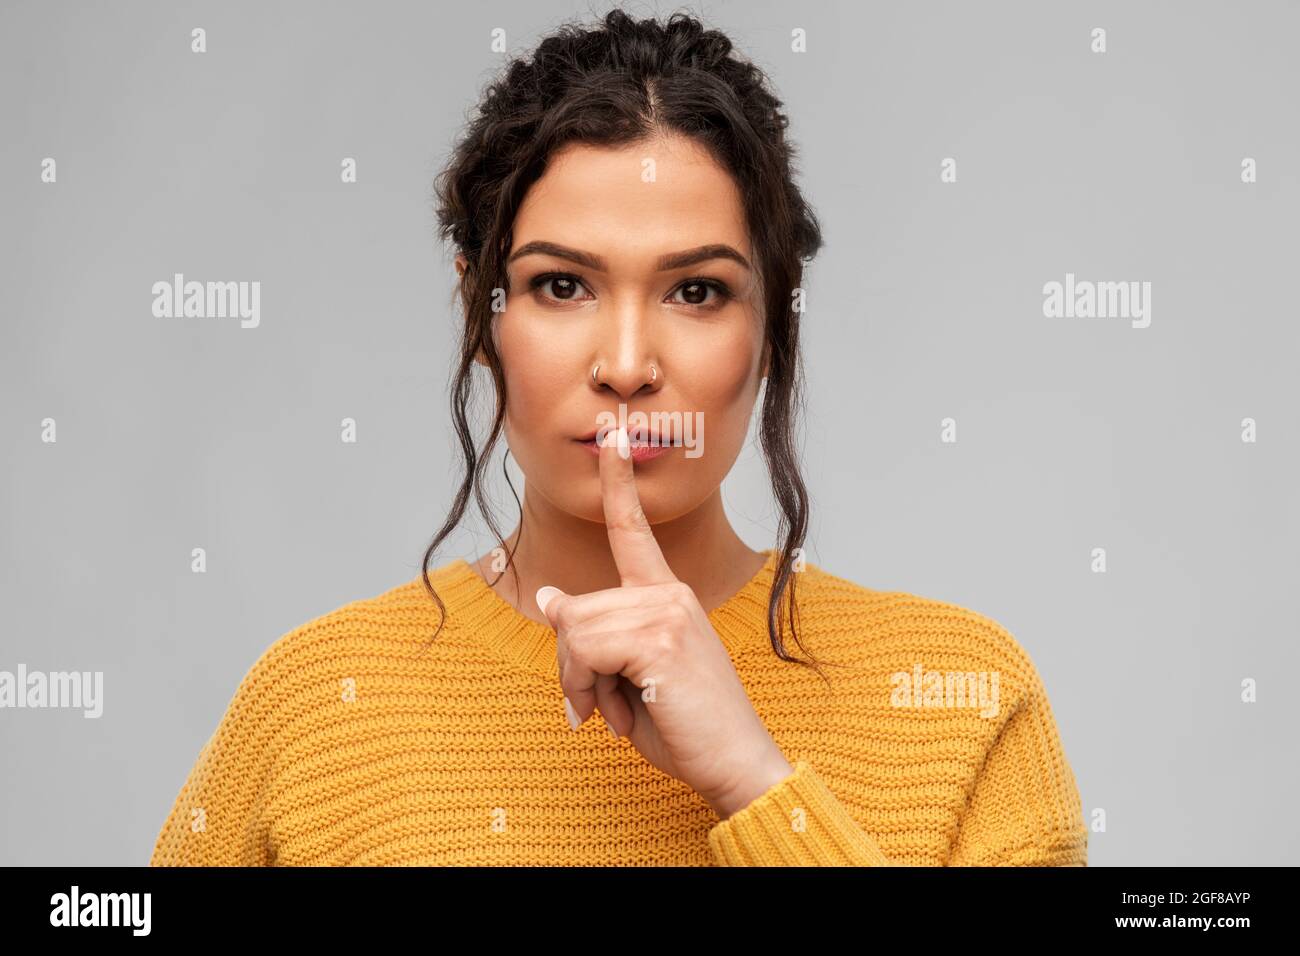 young woman with pierced nose making hush gesture Stock Photo